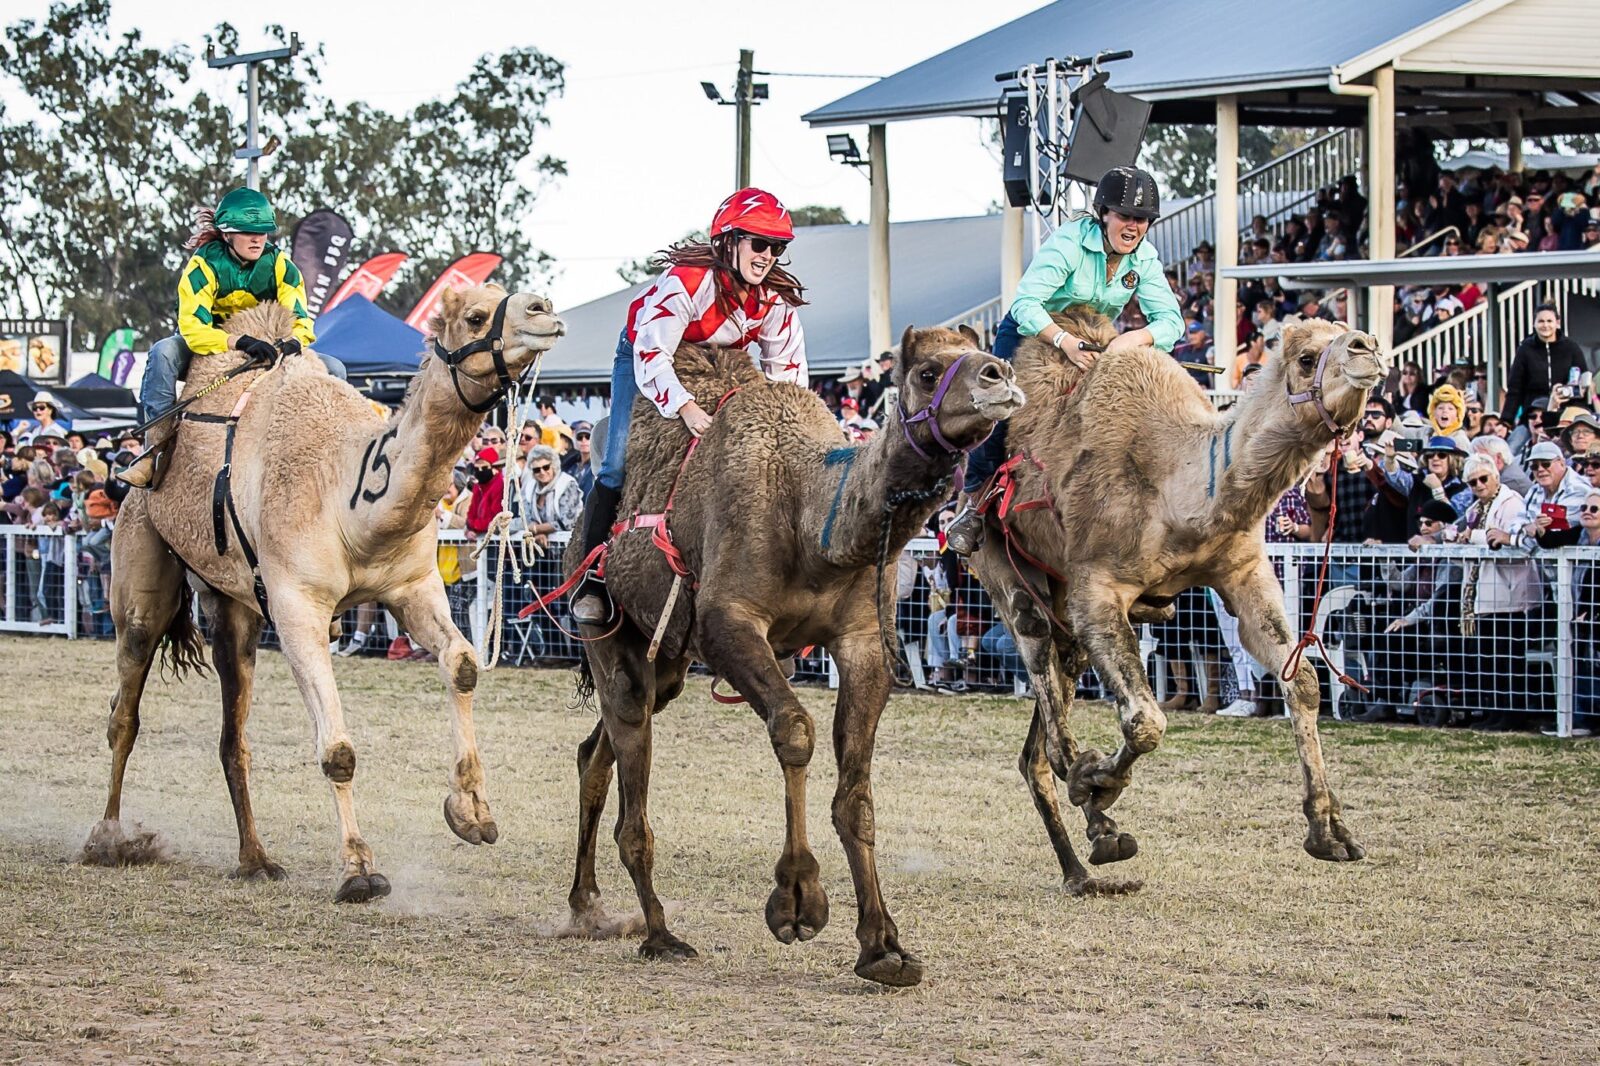 Down the home straight camel racing at Tara Festival